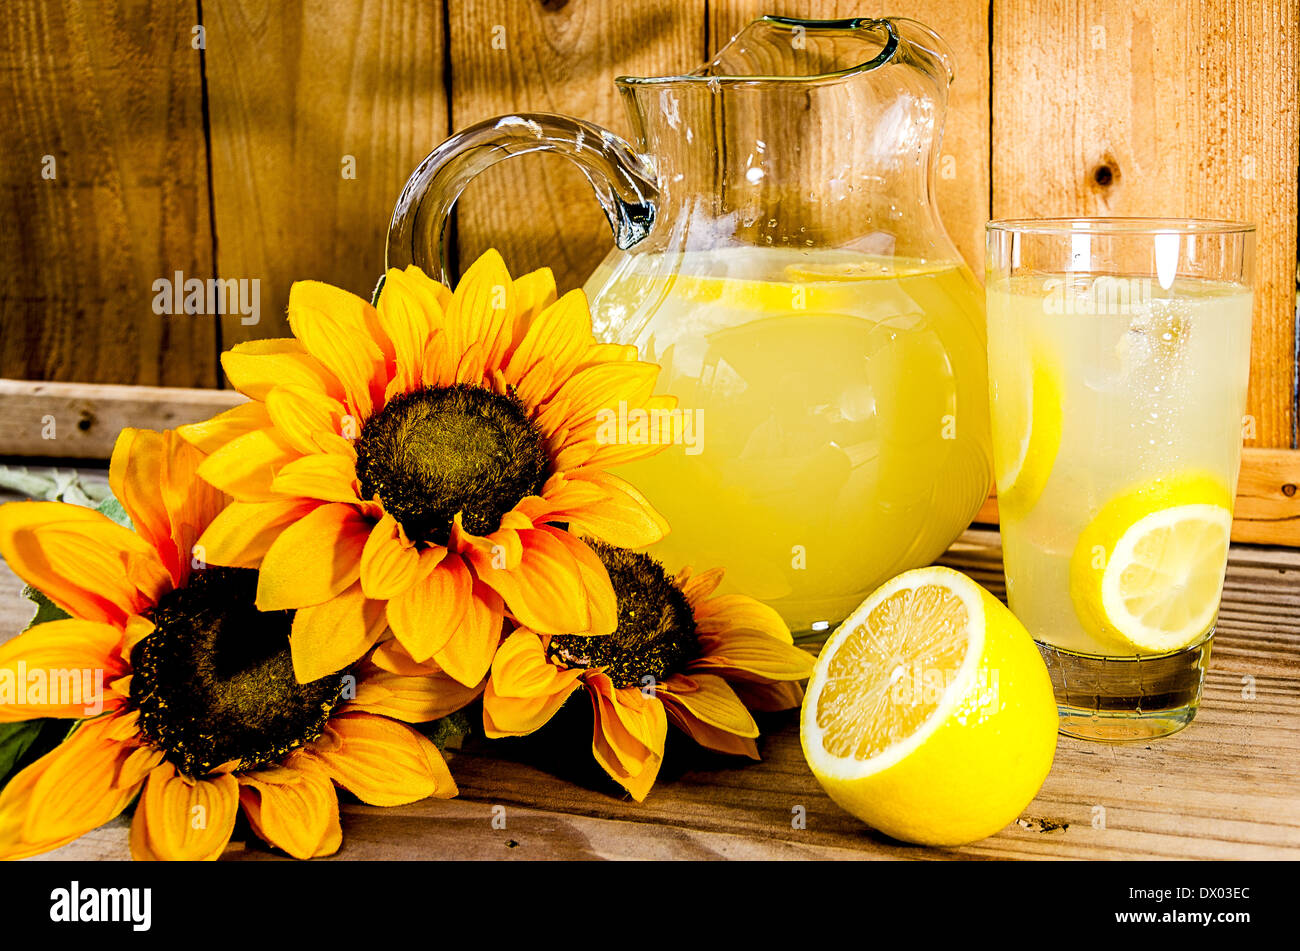 Summer lemonade with lemon slices, pitcher, and sunflowers on wood bench. Stock Photo